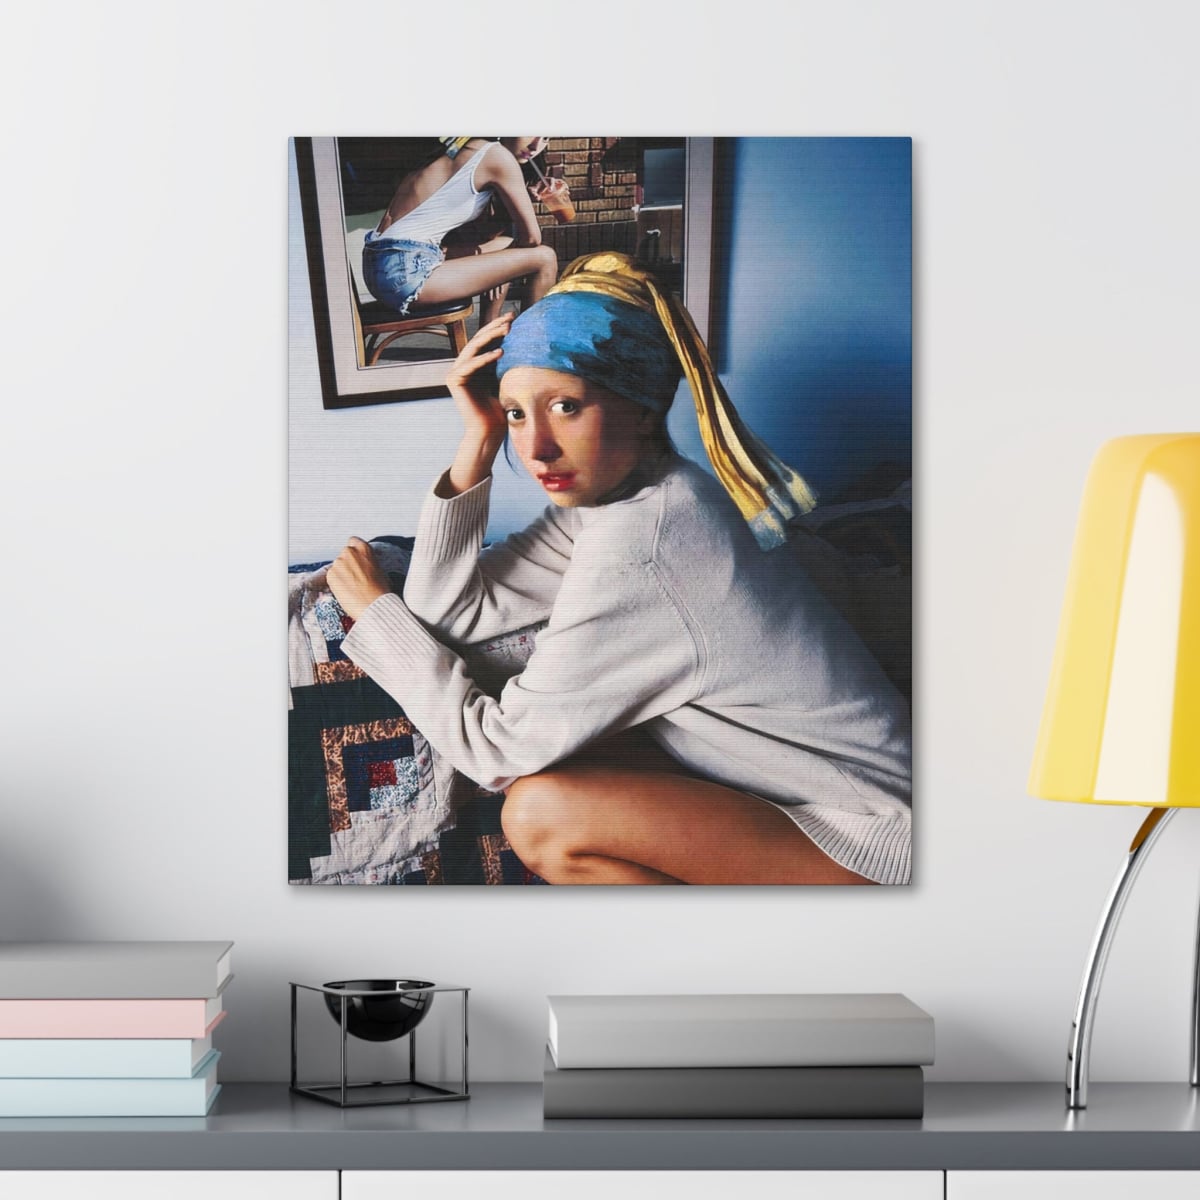 Timeless Art: Girl with a Pearl Earring Parody Canvas Gallery Wraps